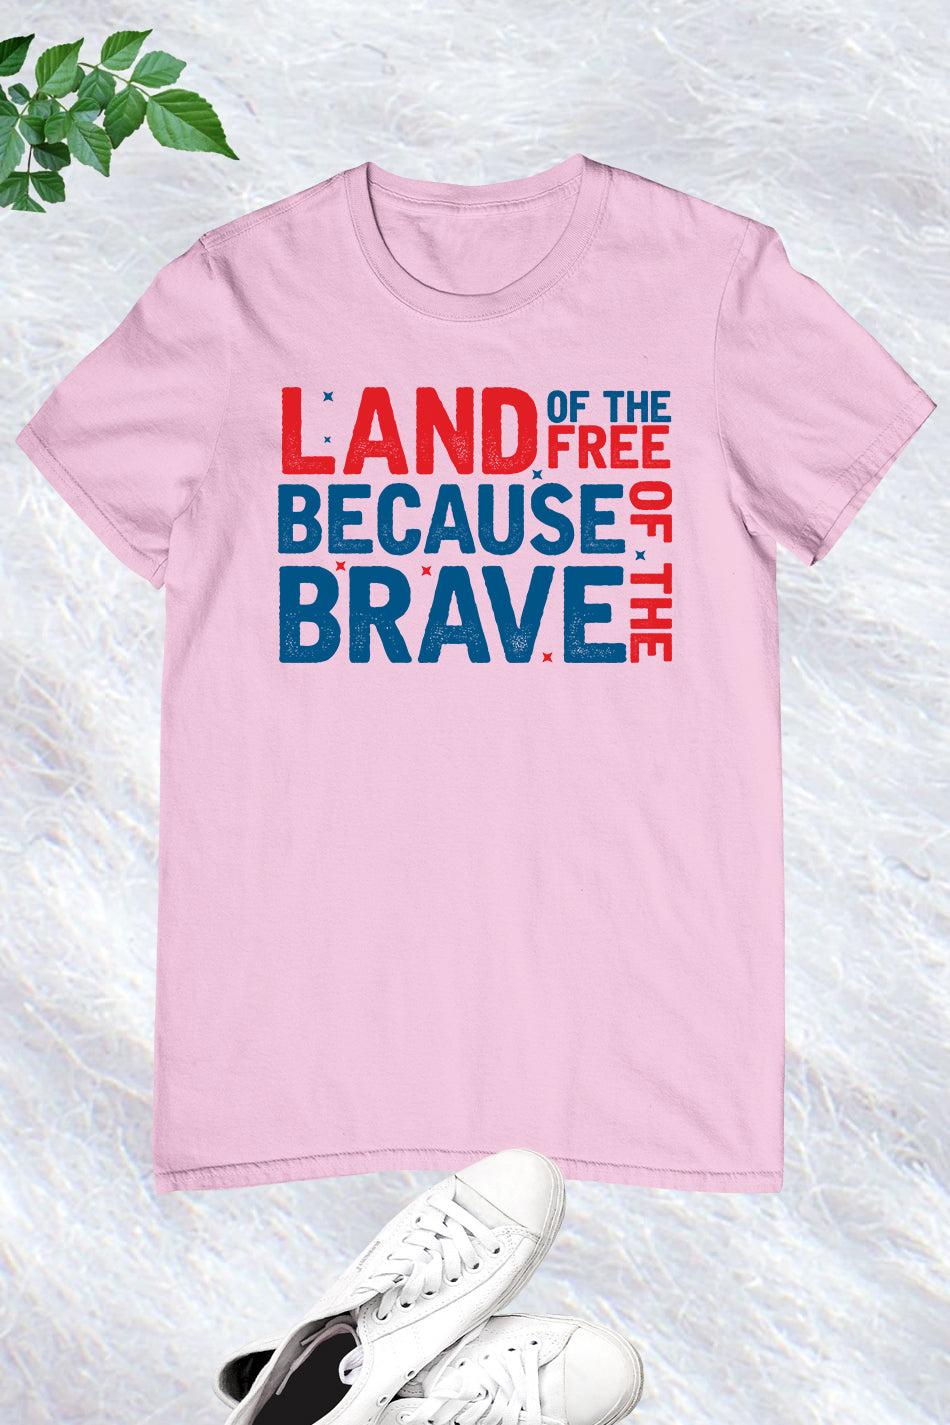 Land Of The Free Because of The Brave T Shirts